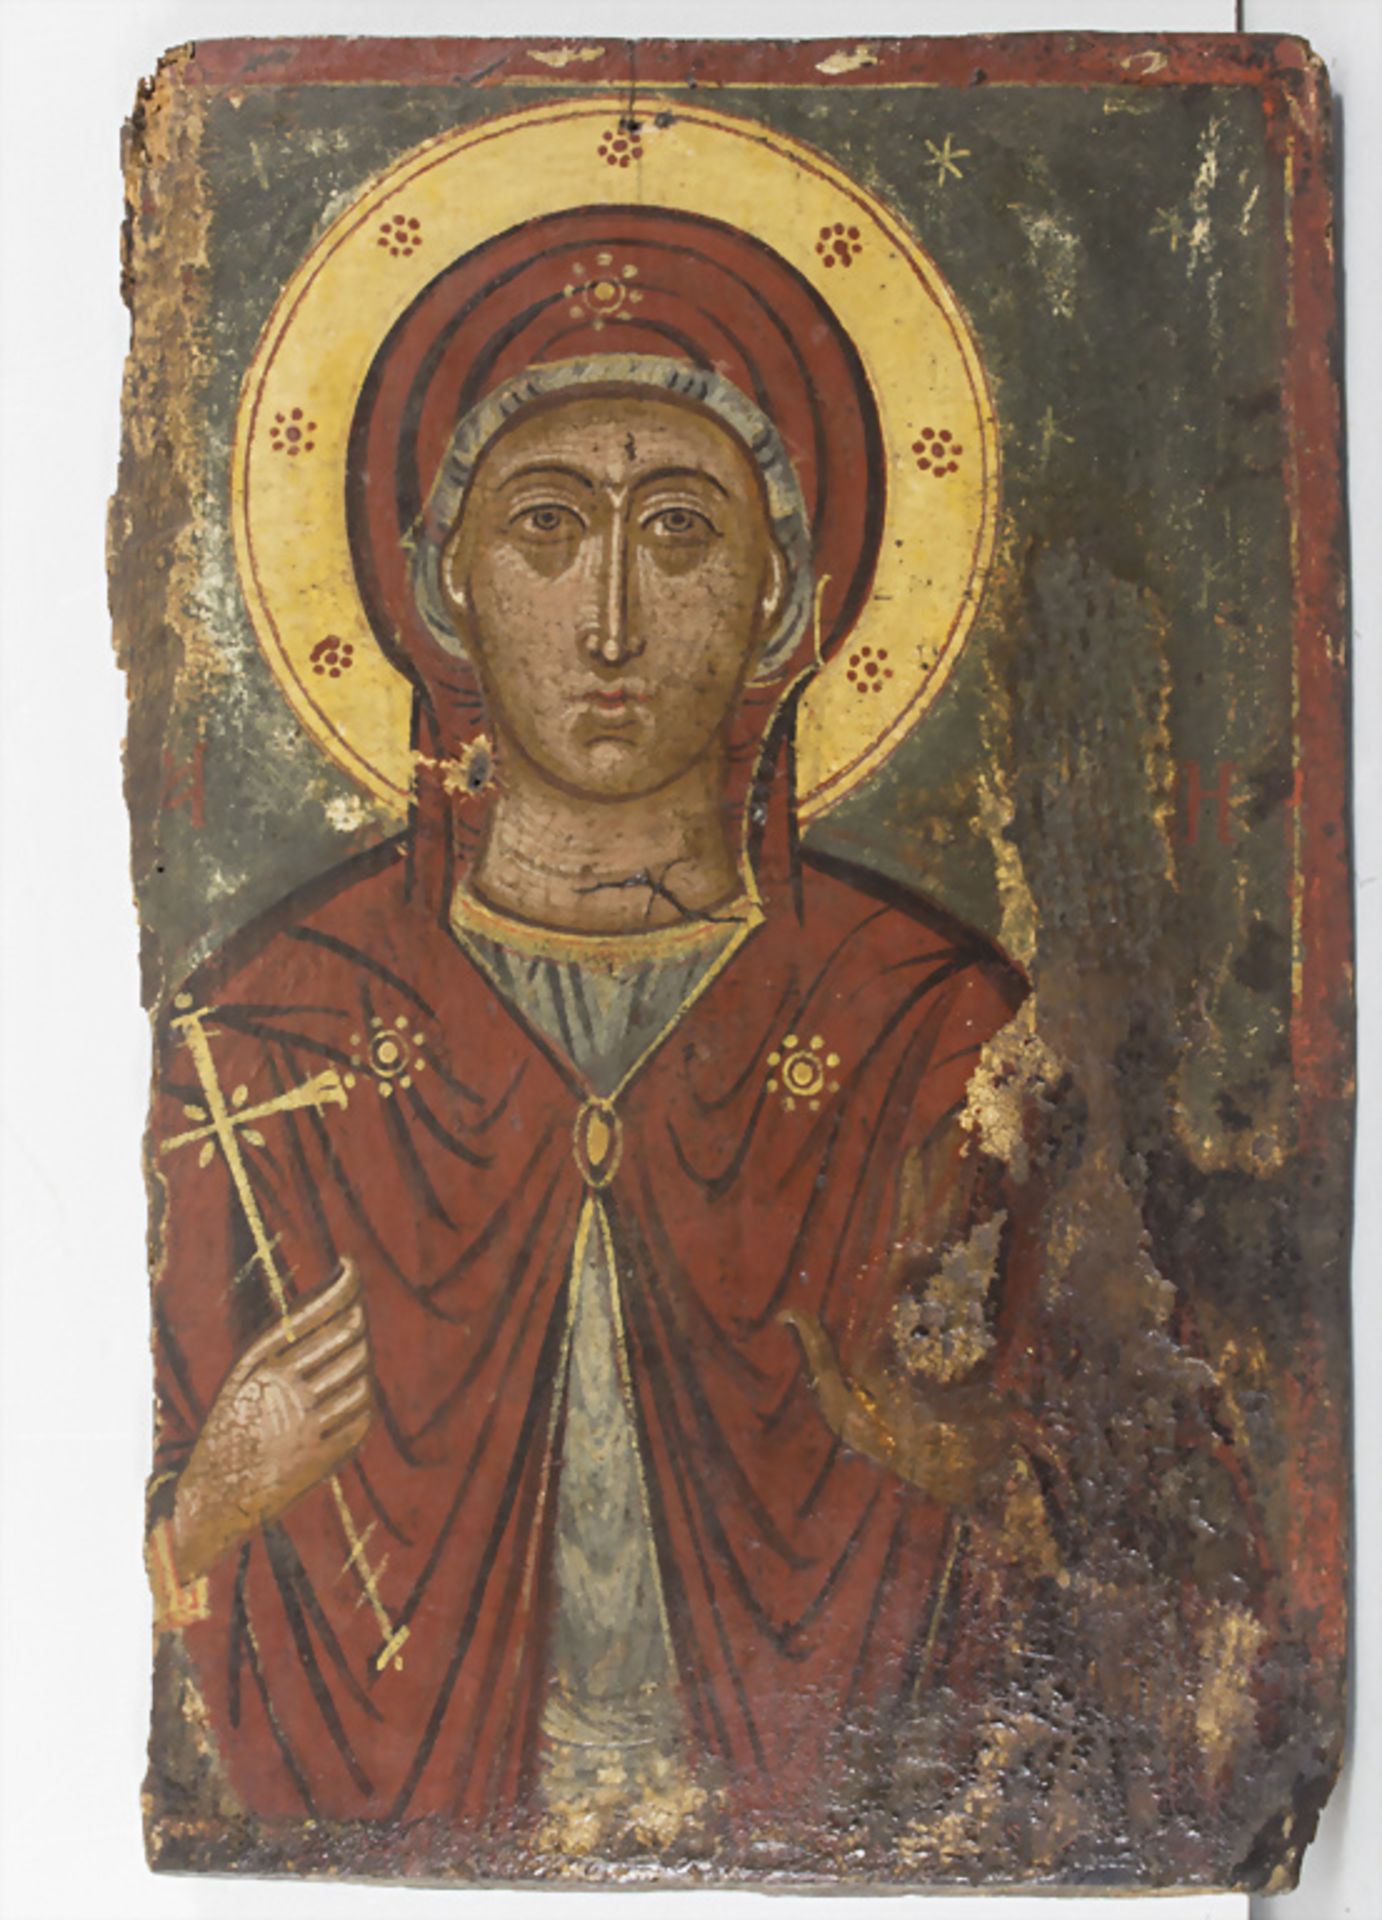 Orthodoxe Ikone der Mutter Gottes / An Orthodox icon of the Mother of God, 19. Jh.